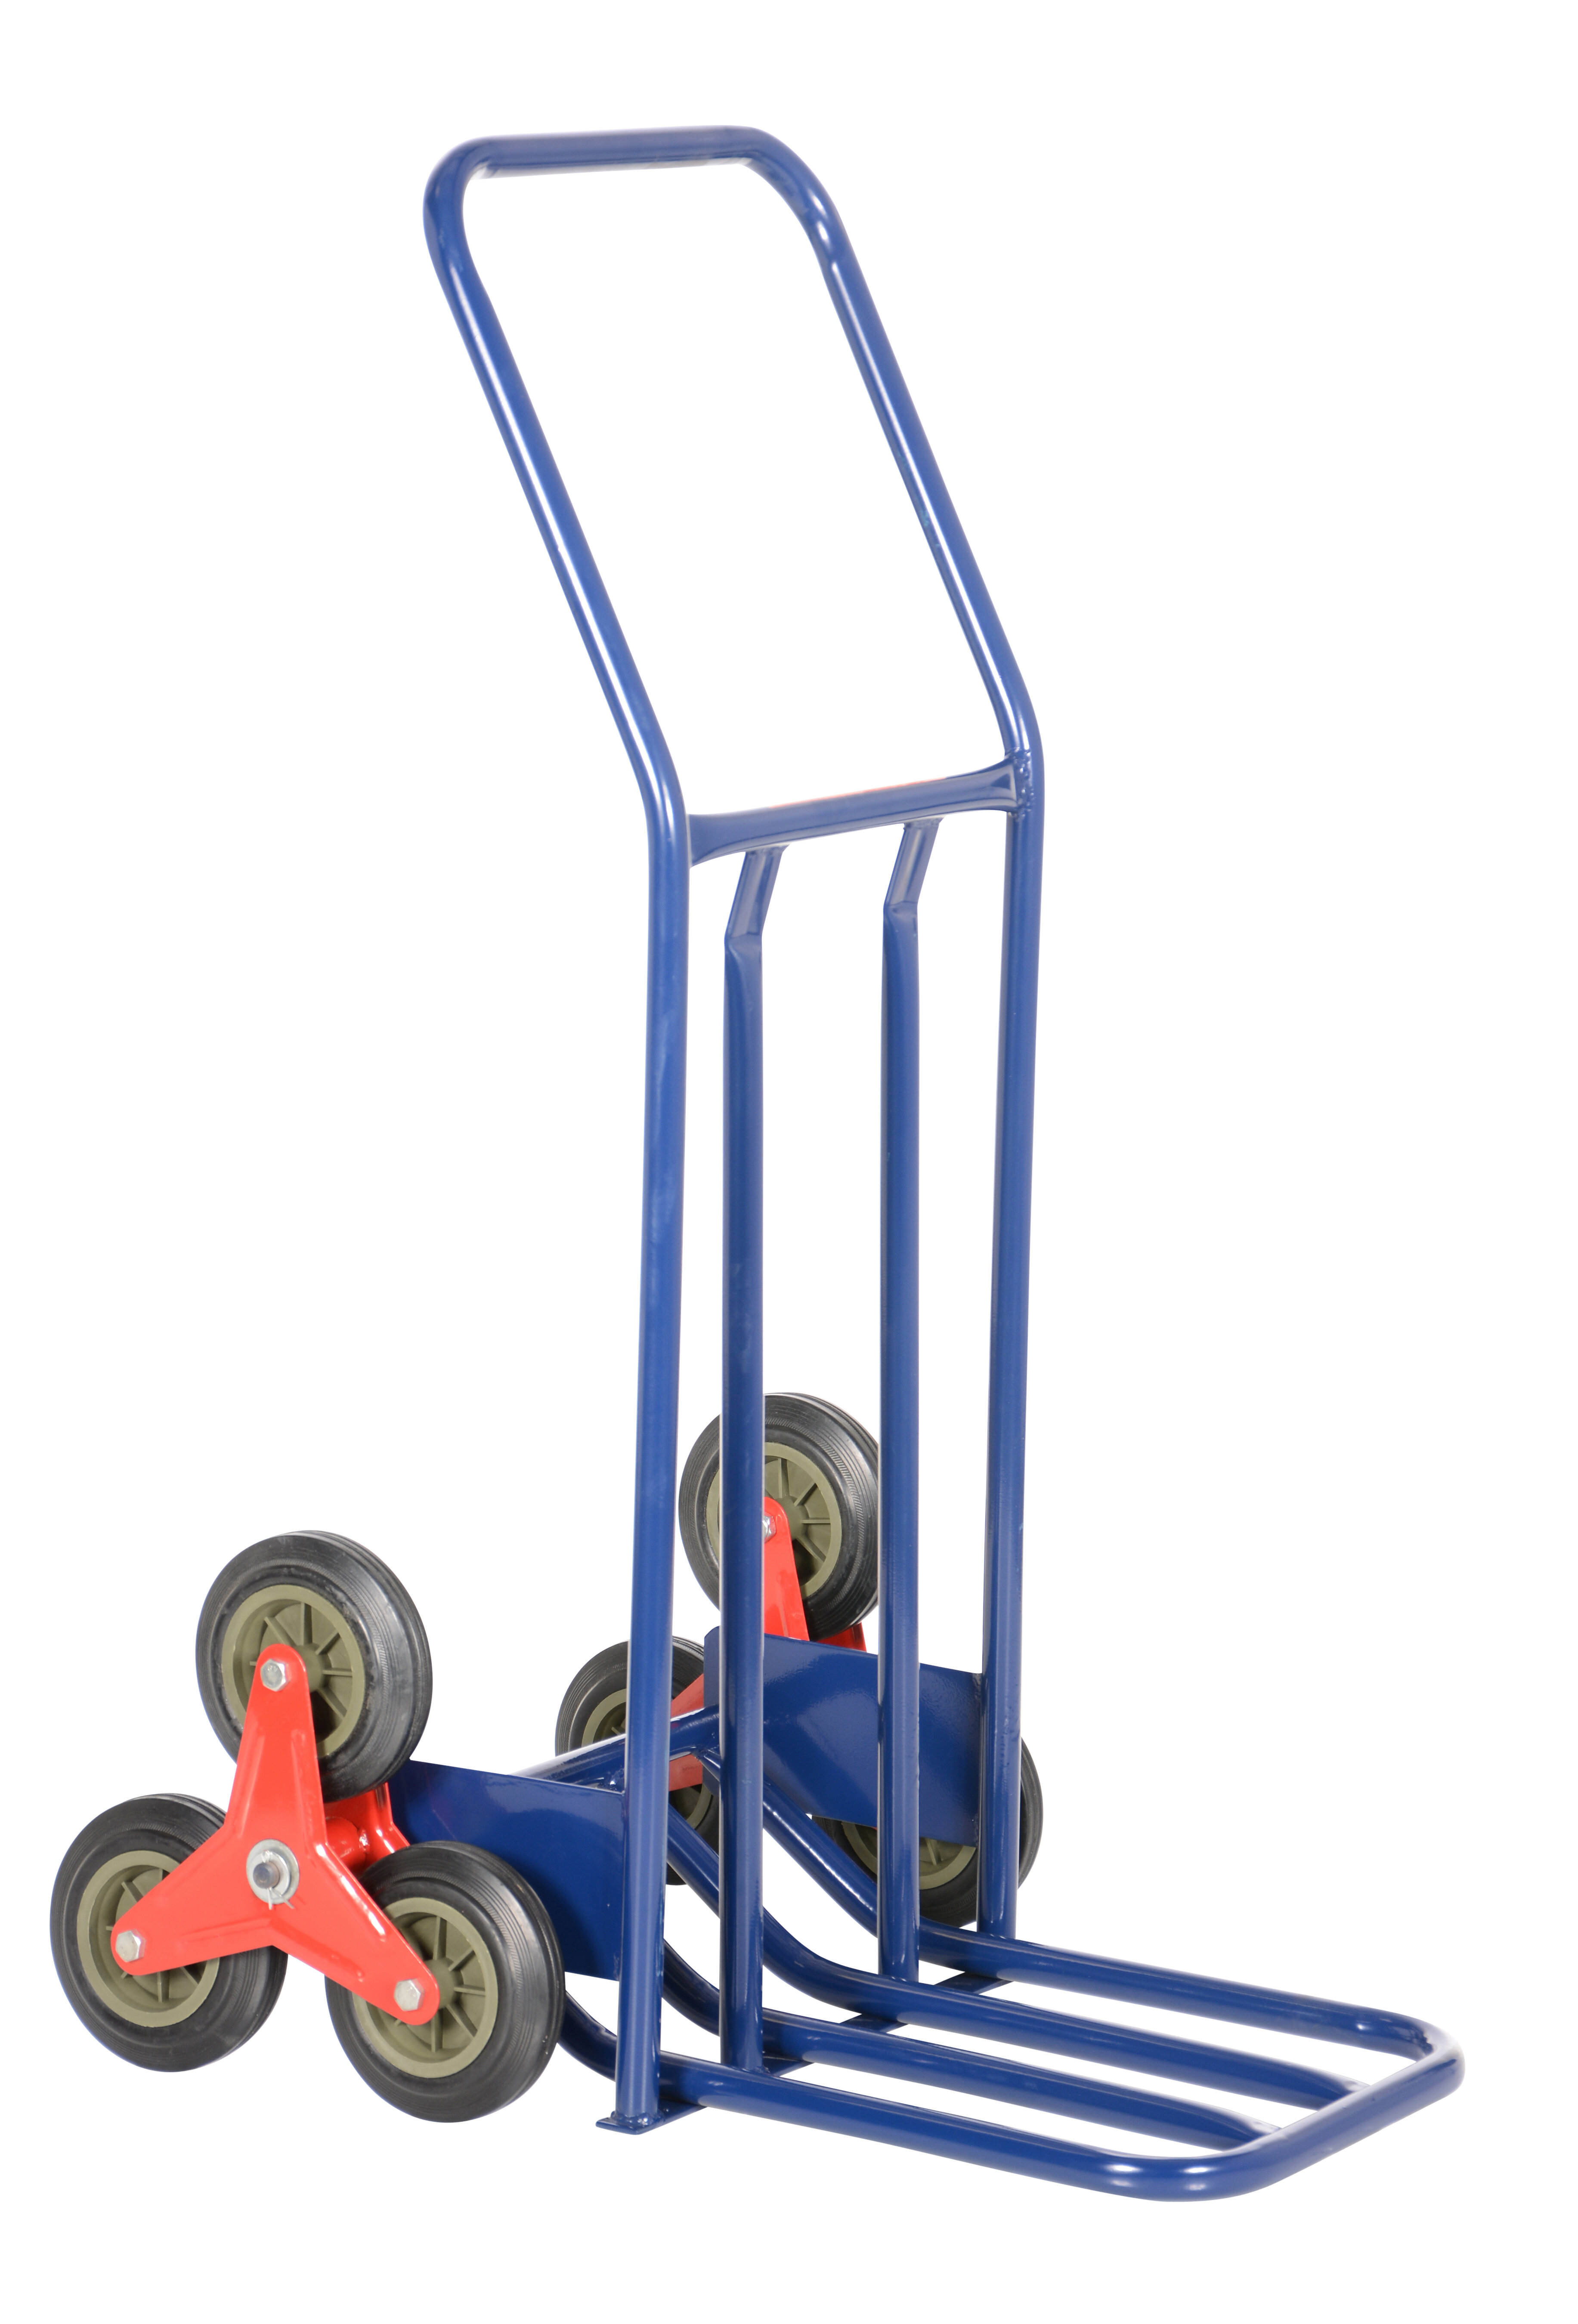 Tri Dolly 3 Wheels Heavy Duty Mover 12 in Steel Hand Trucks 300 lb Load Rating 